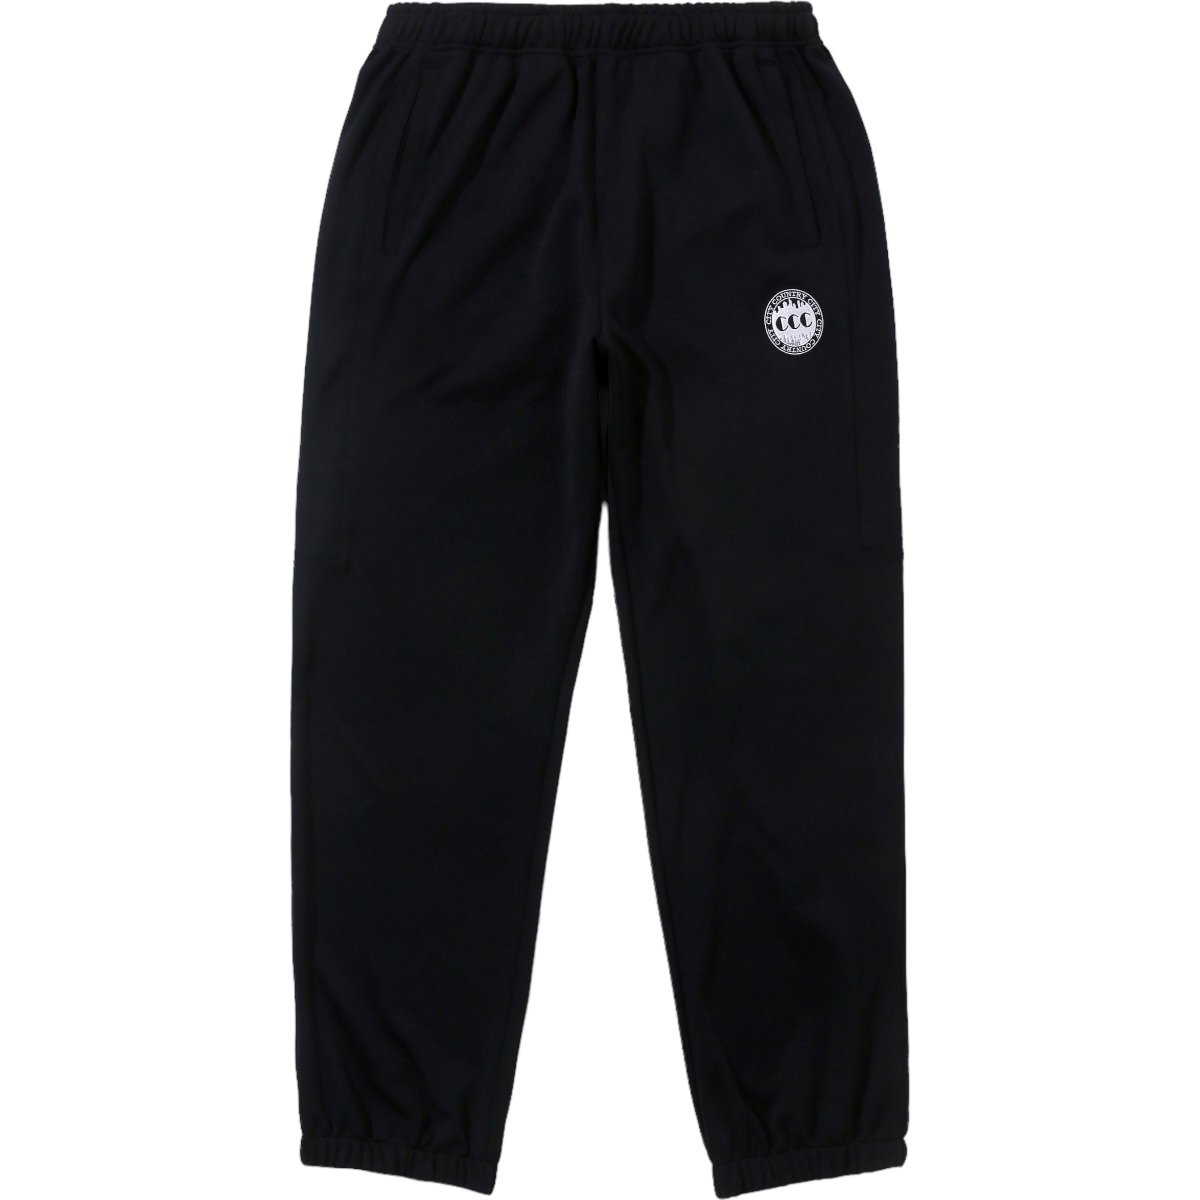 CITY COUNTRY CITY<BR>EMBROIDERED LOGO SWITCHING TRACK PANTS